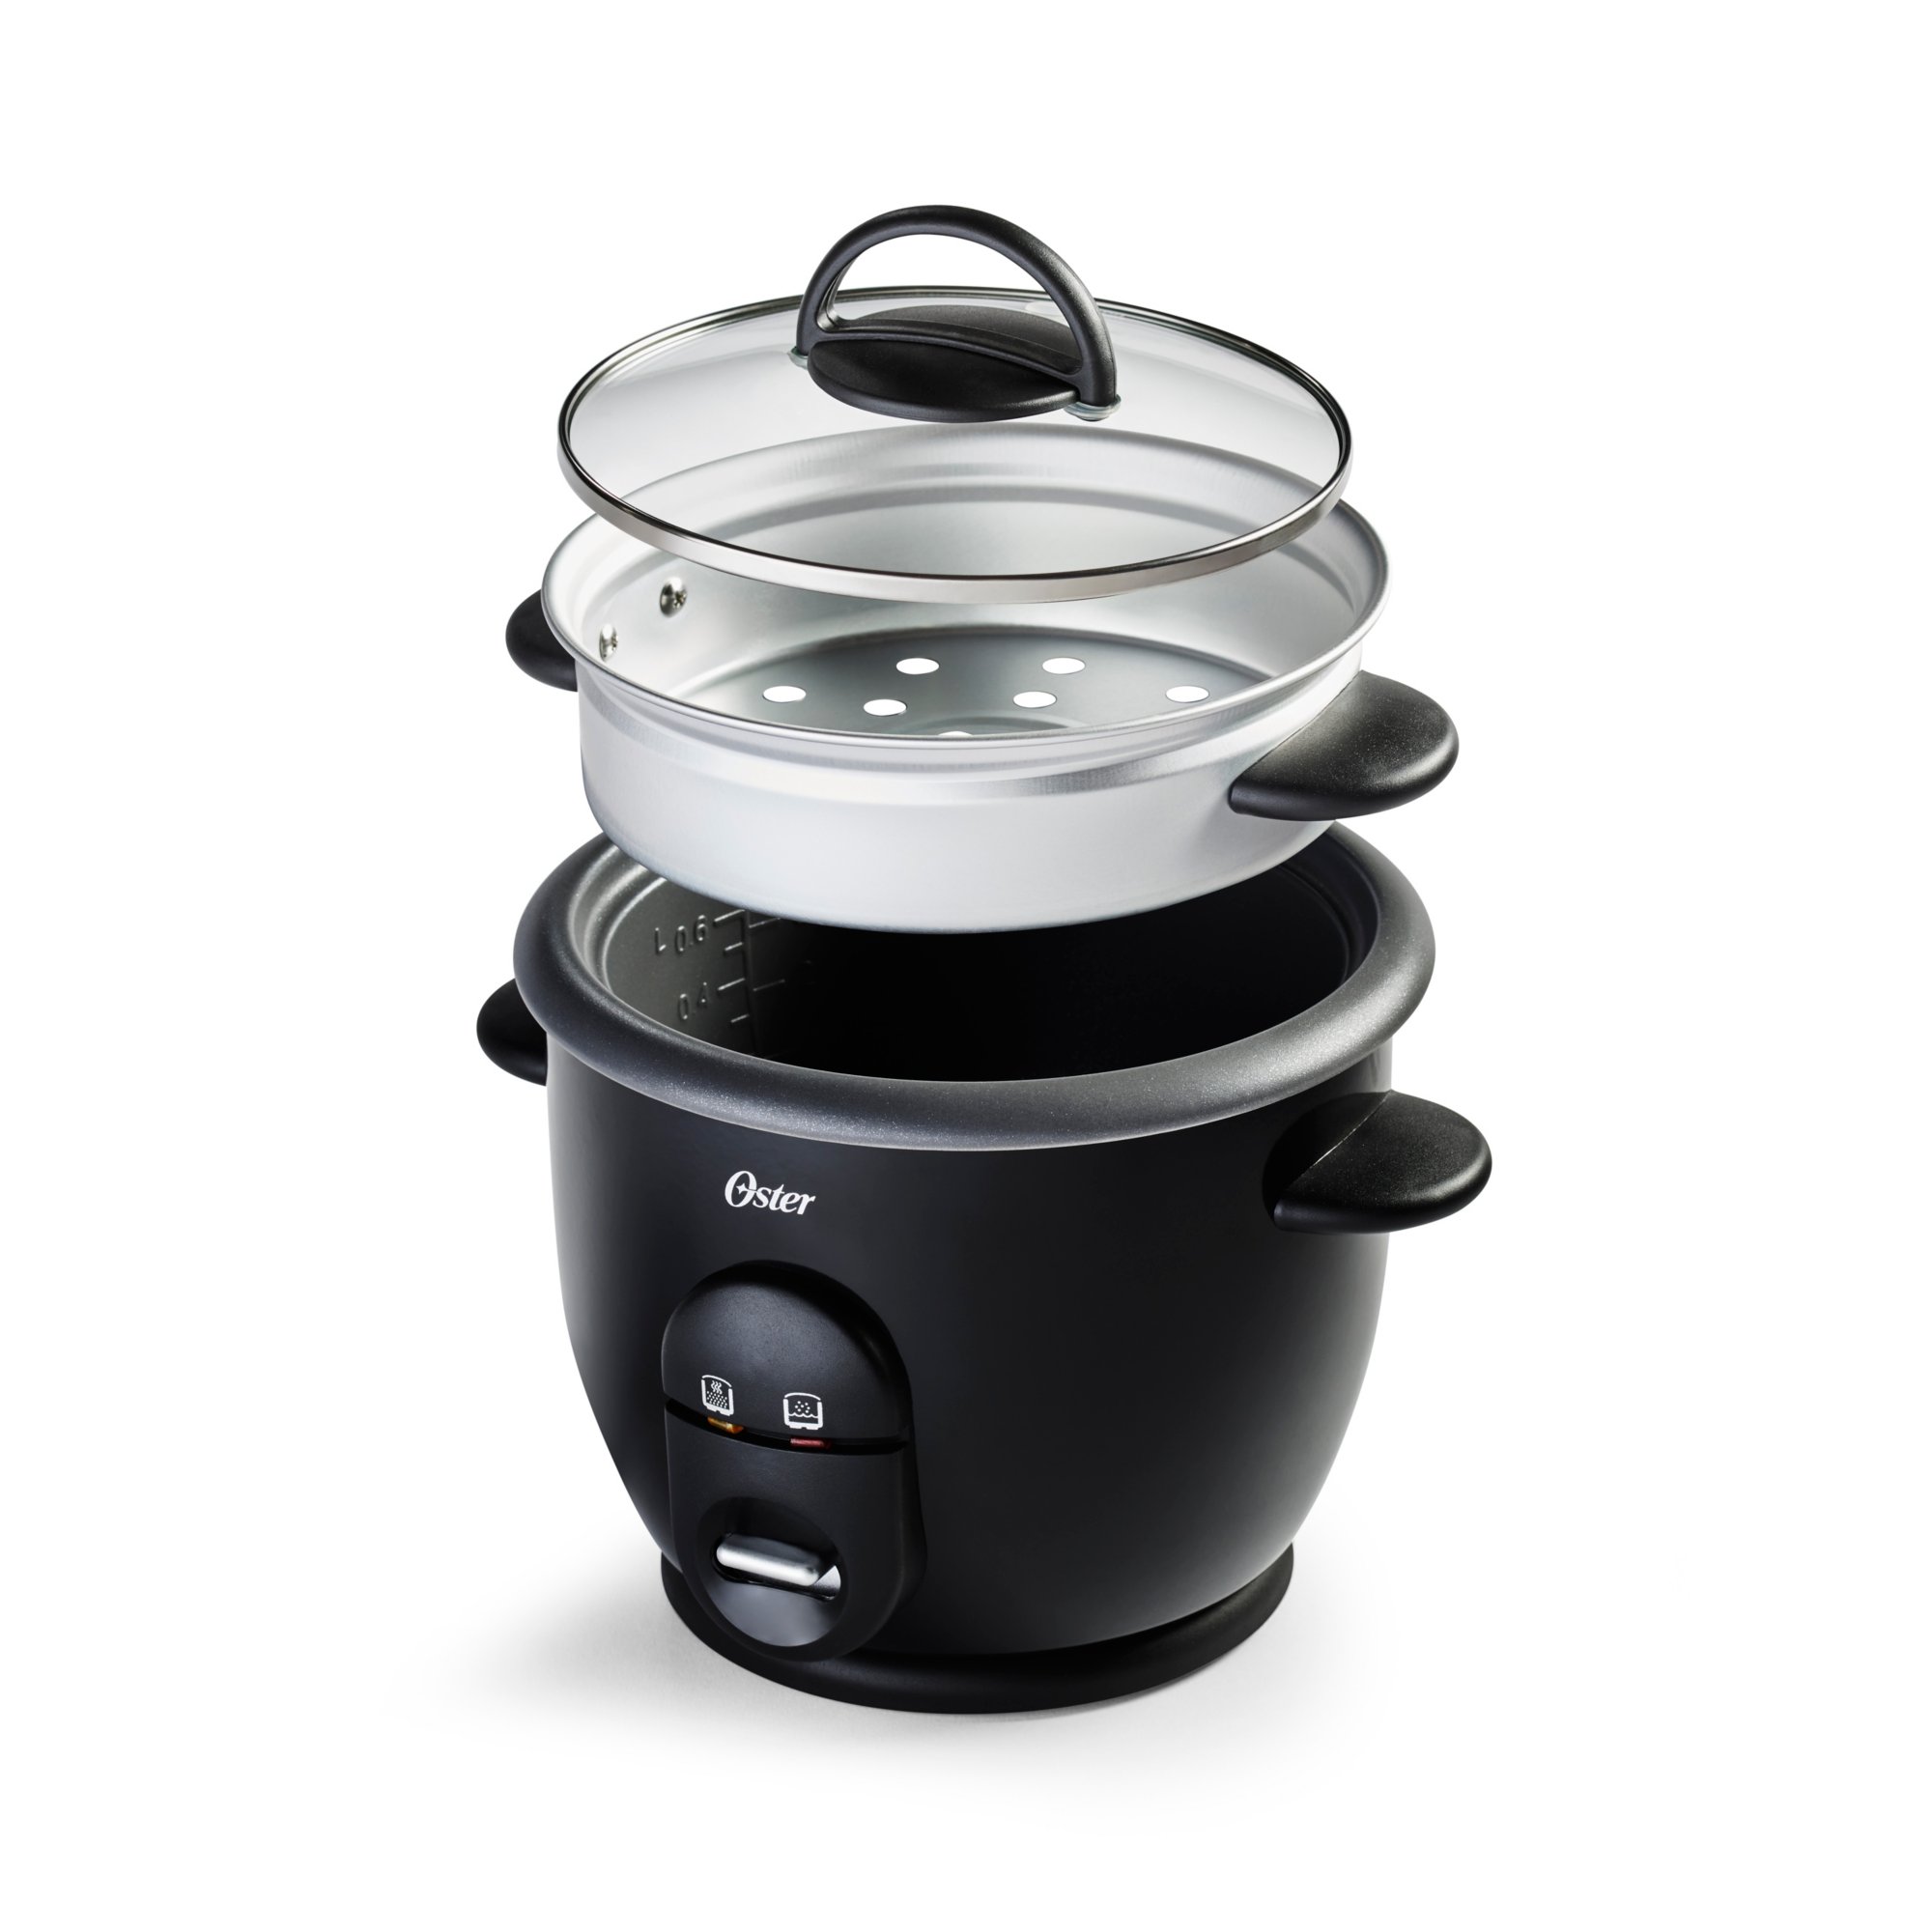 https://s7d9.scene7.com/is/image/NewellRubbermaid/CKSTRC6S-DM-oster-rice-cooker-with-steamer-black-angle-2?wid=2000&hei=2000